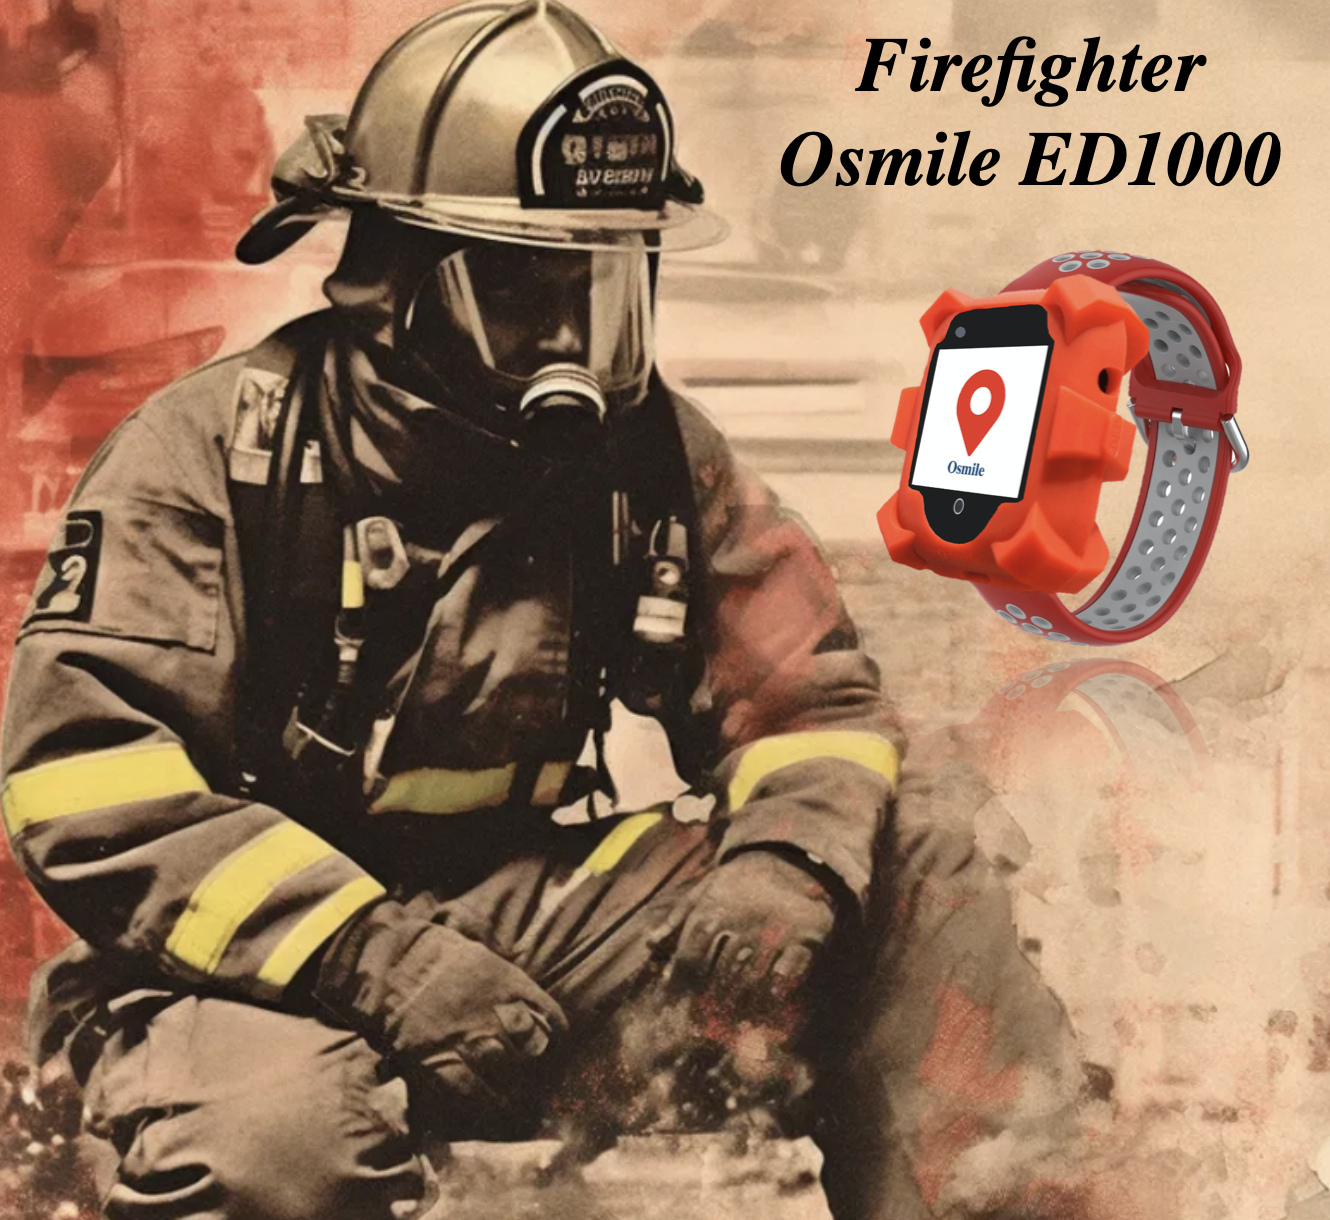 Osmile ED1000 Firefighter SOS & GPS Positioning in live video